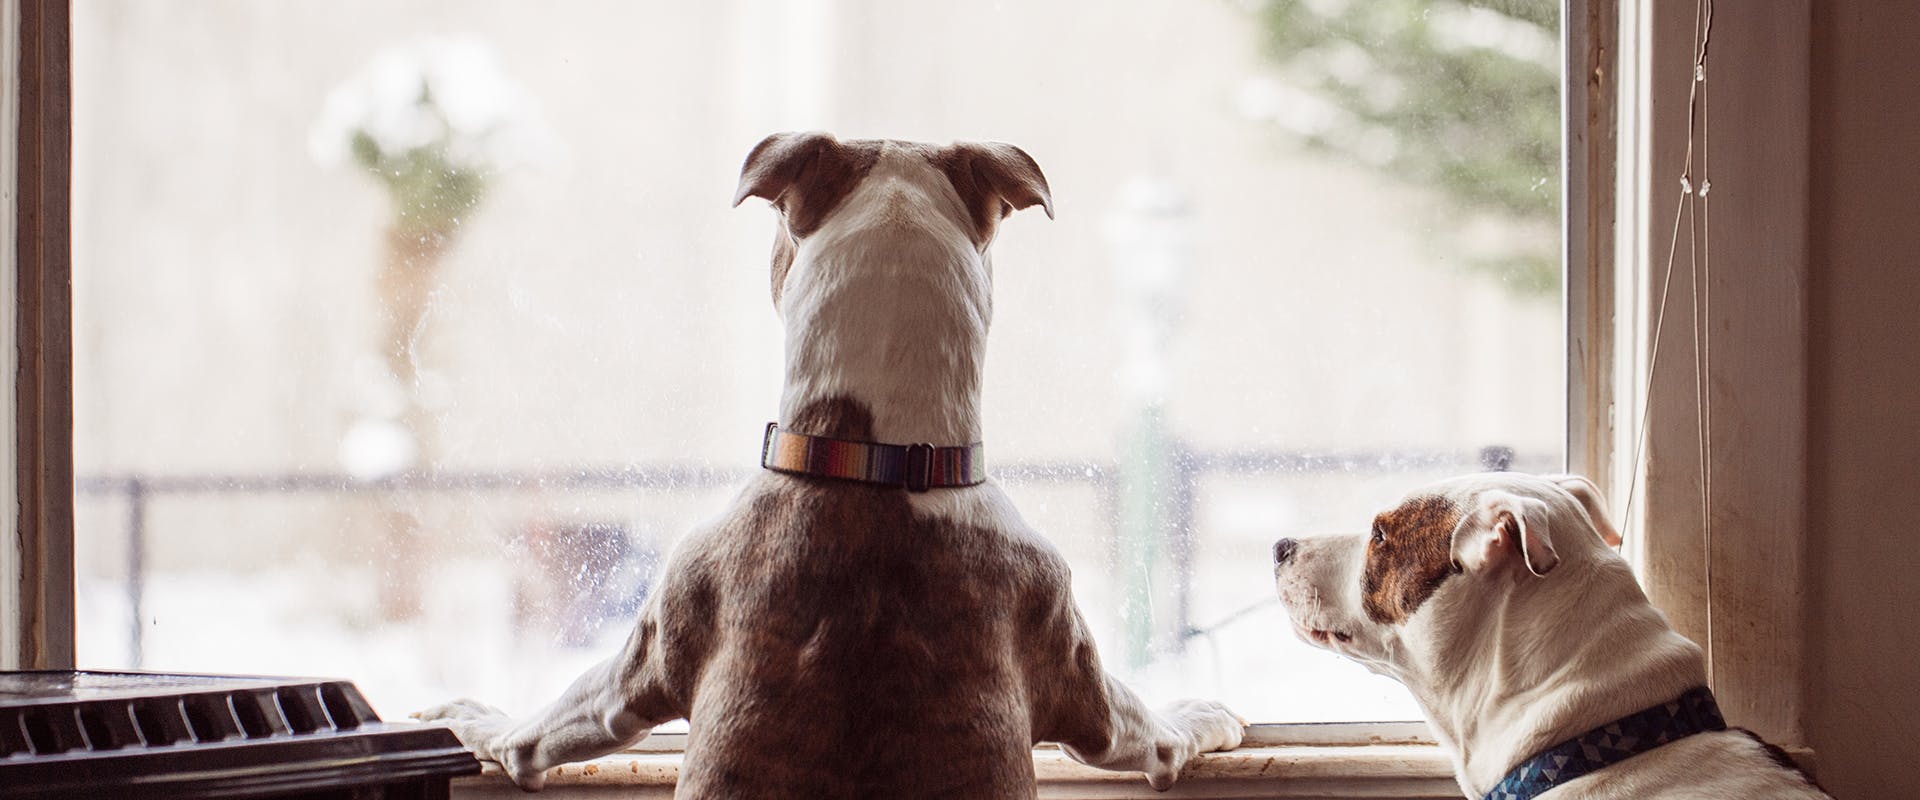 Two dogs looking out the window for their owner